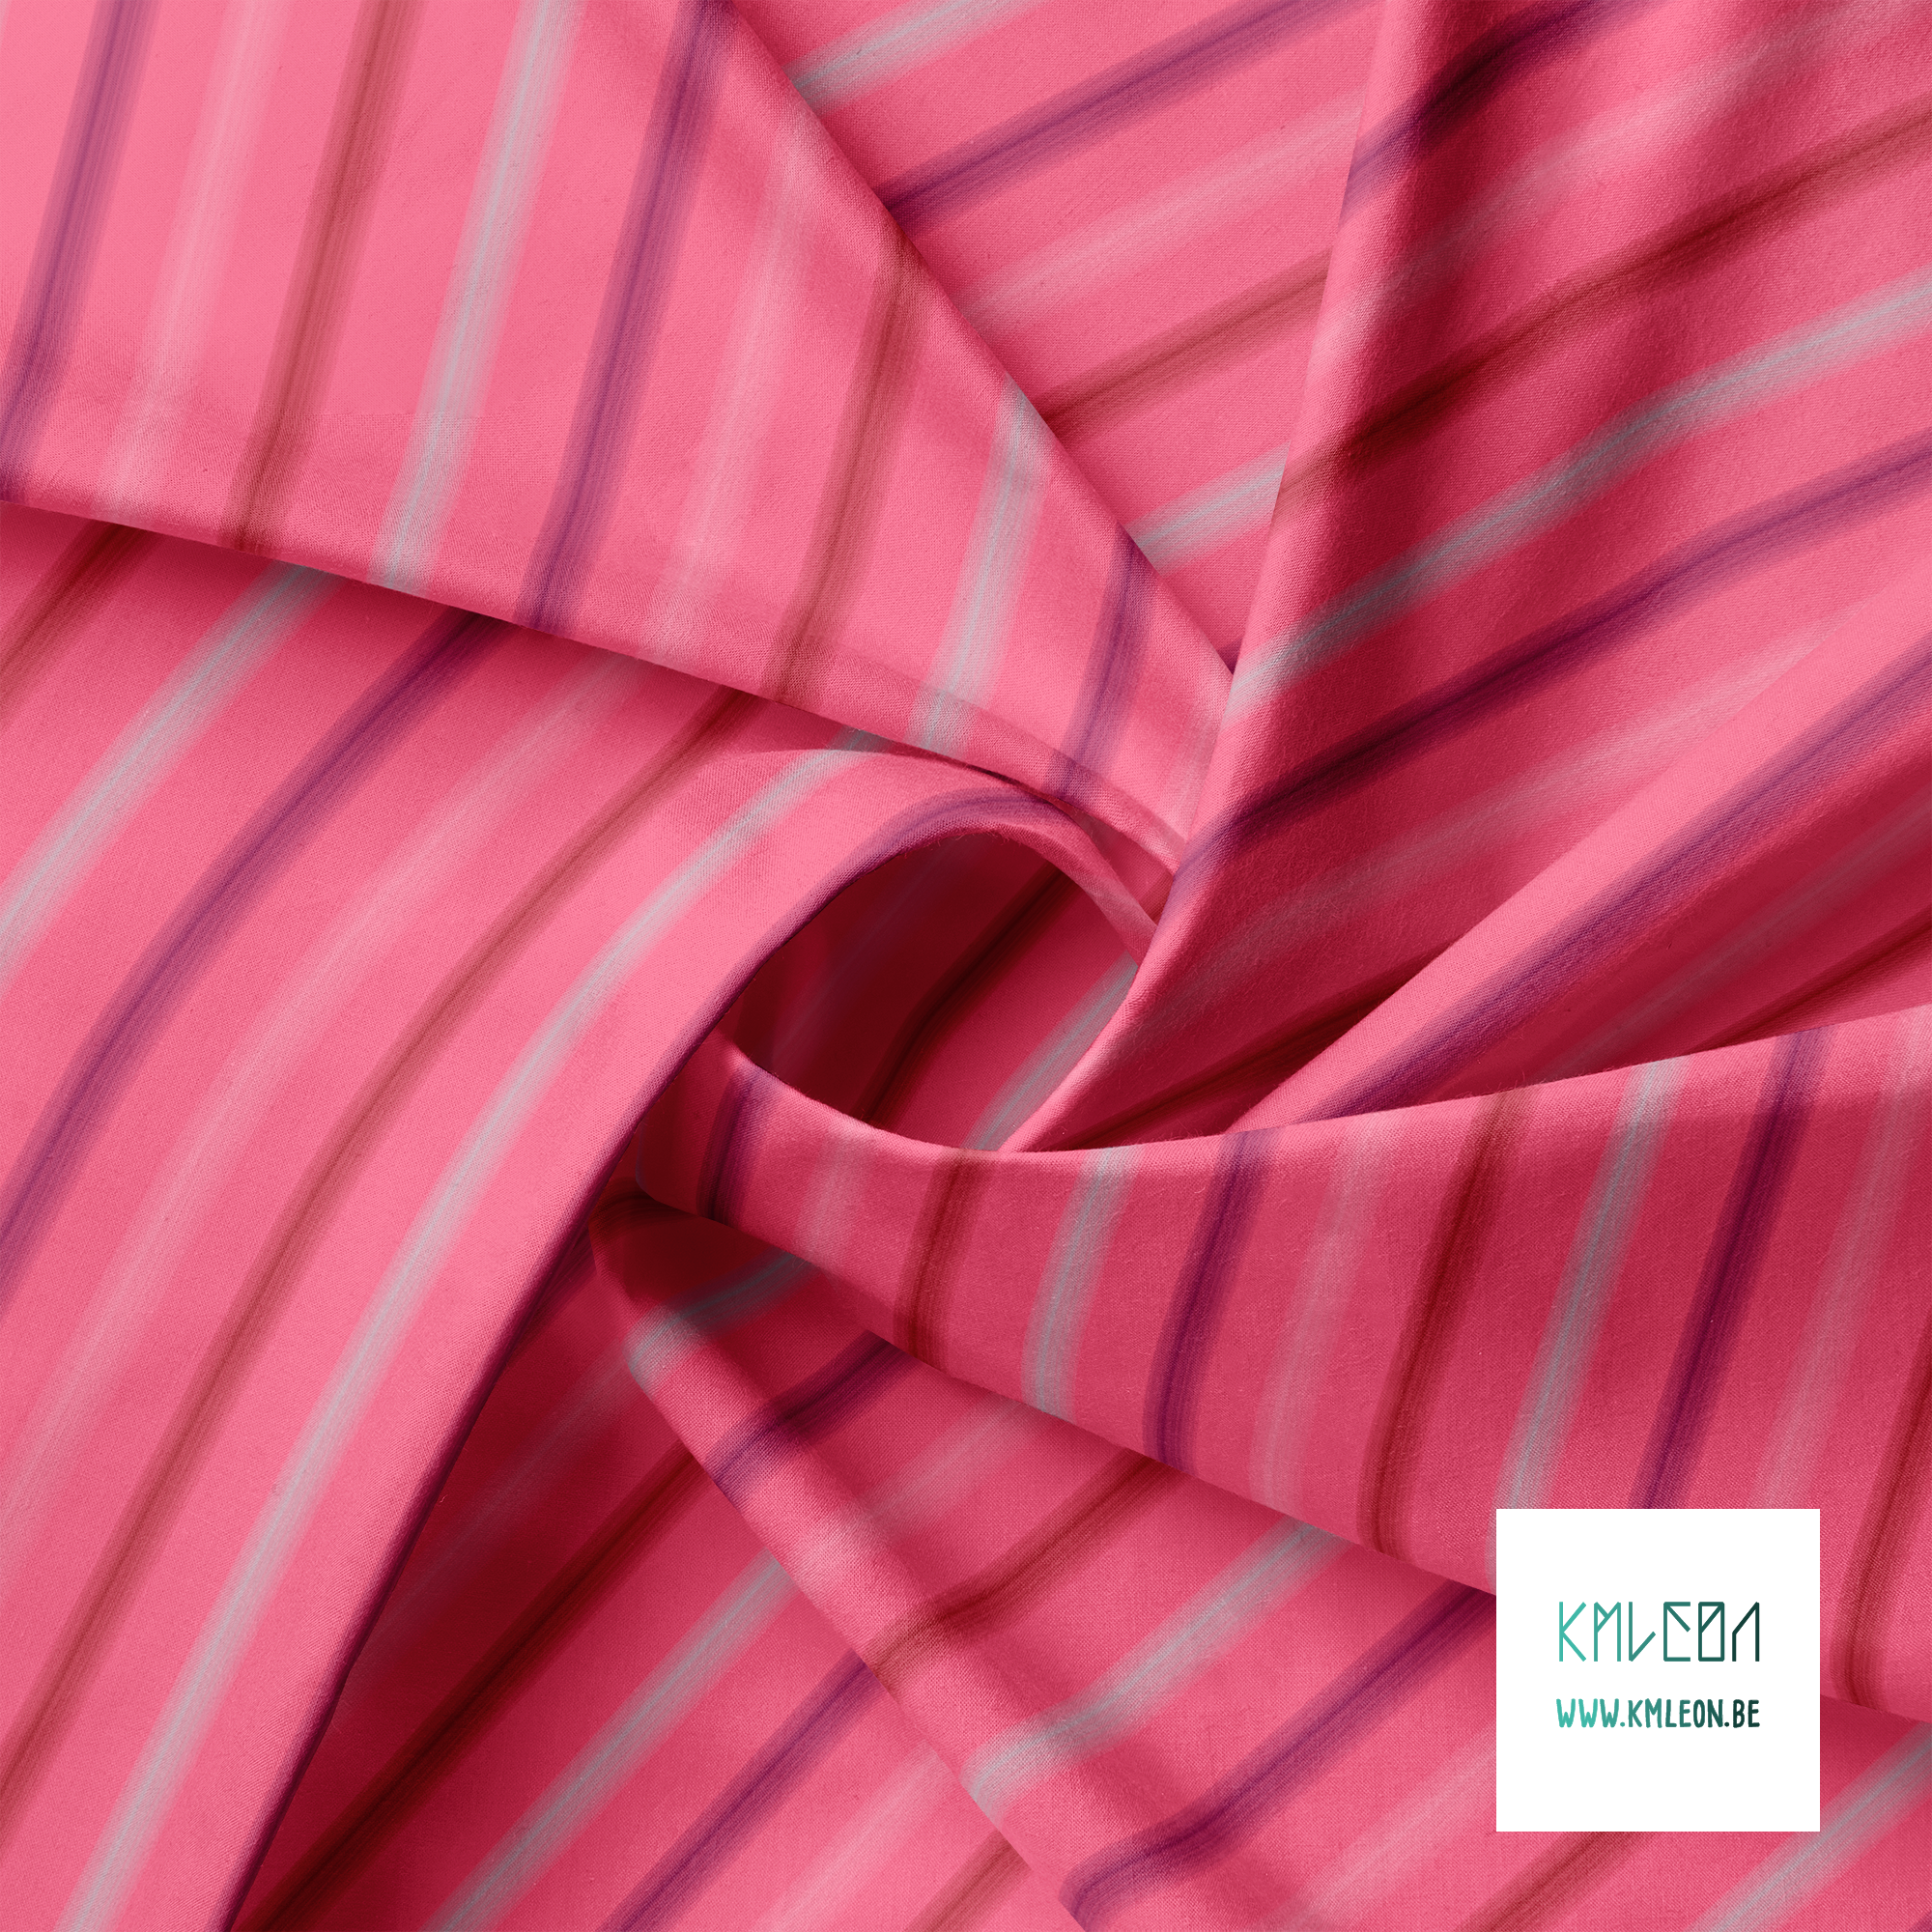 Soft horizontal stripes in purple, red, light blue and pink fabric